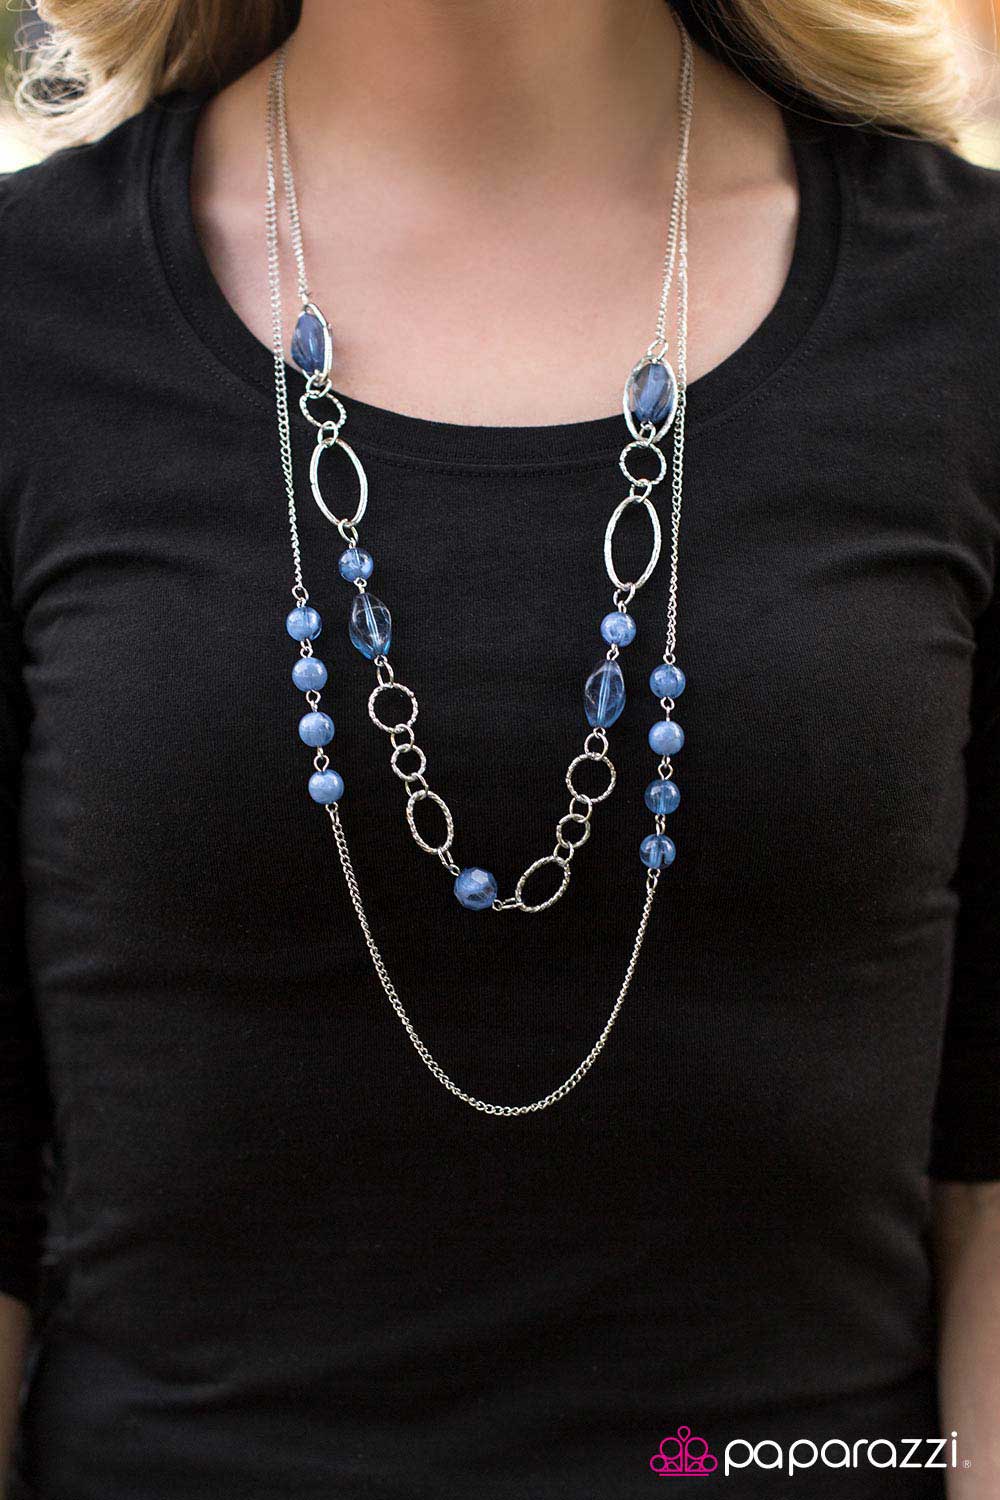 Touch The Clouds - Blue - Paparazzi necklace